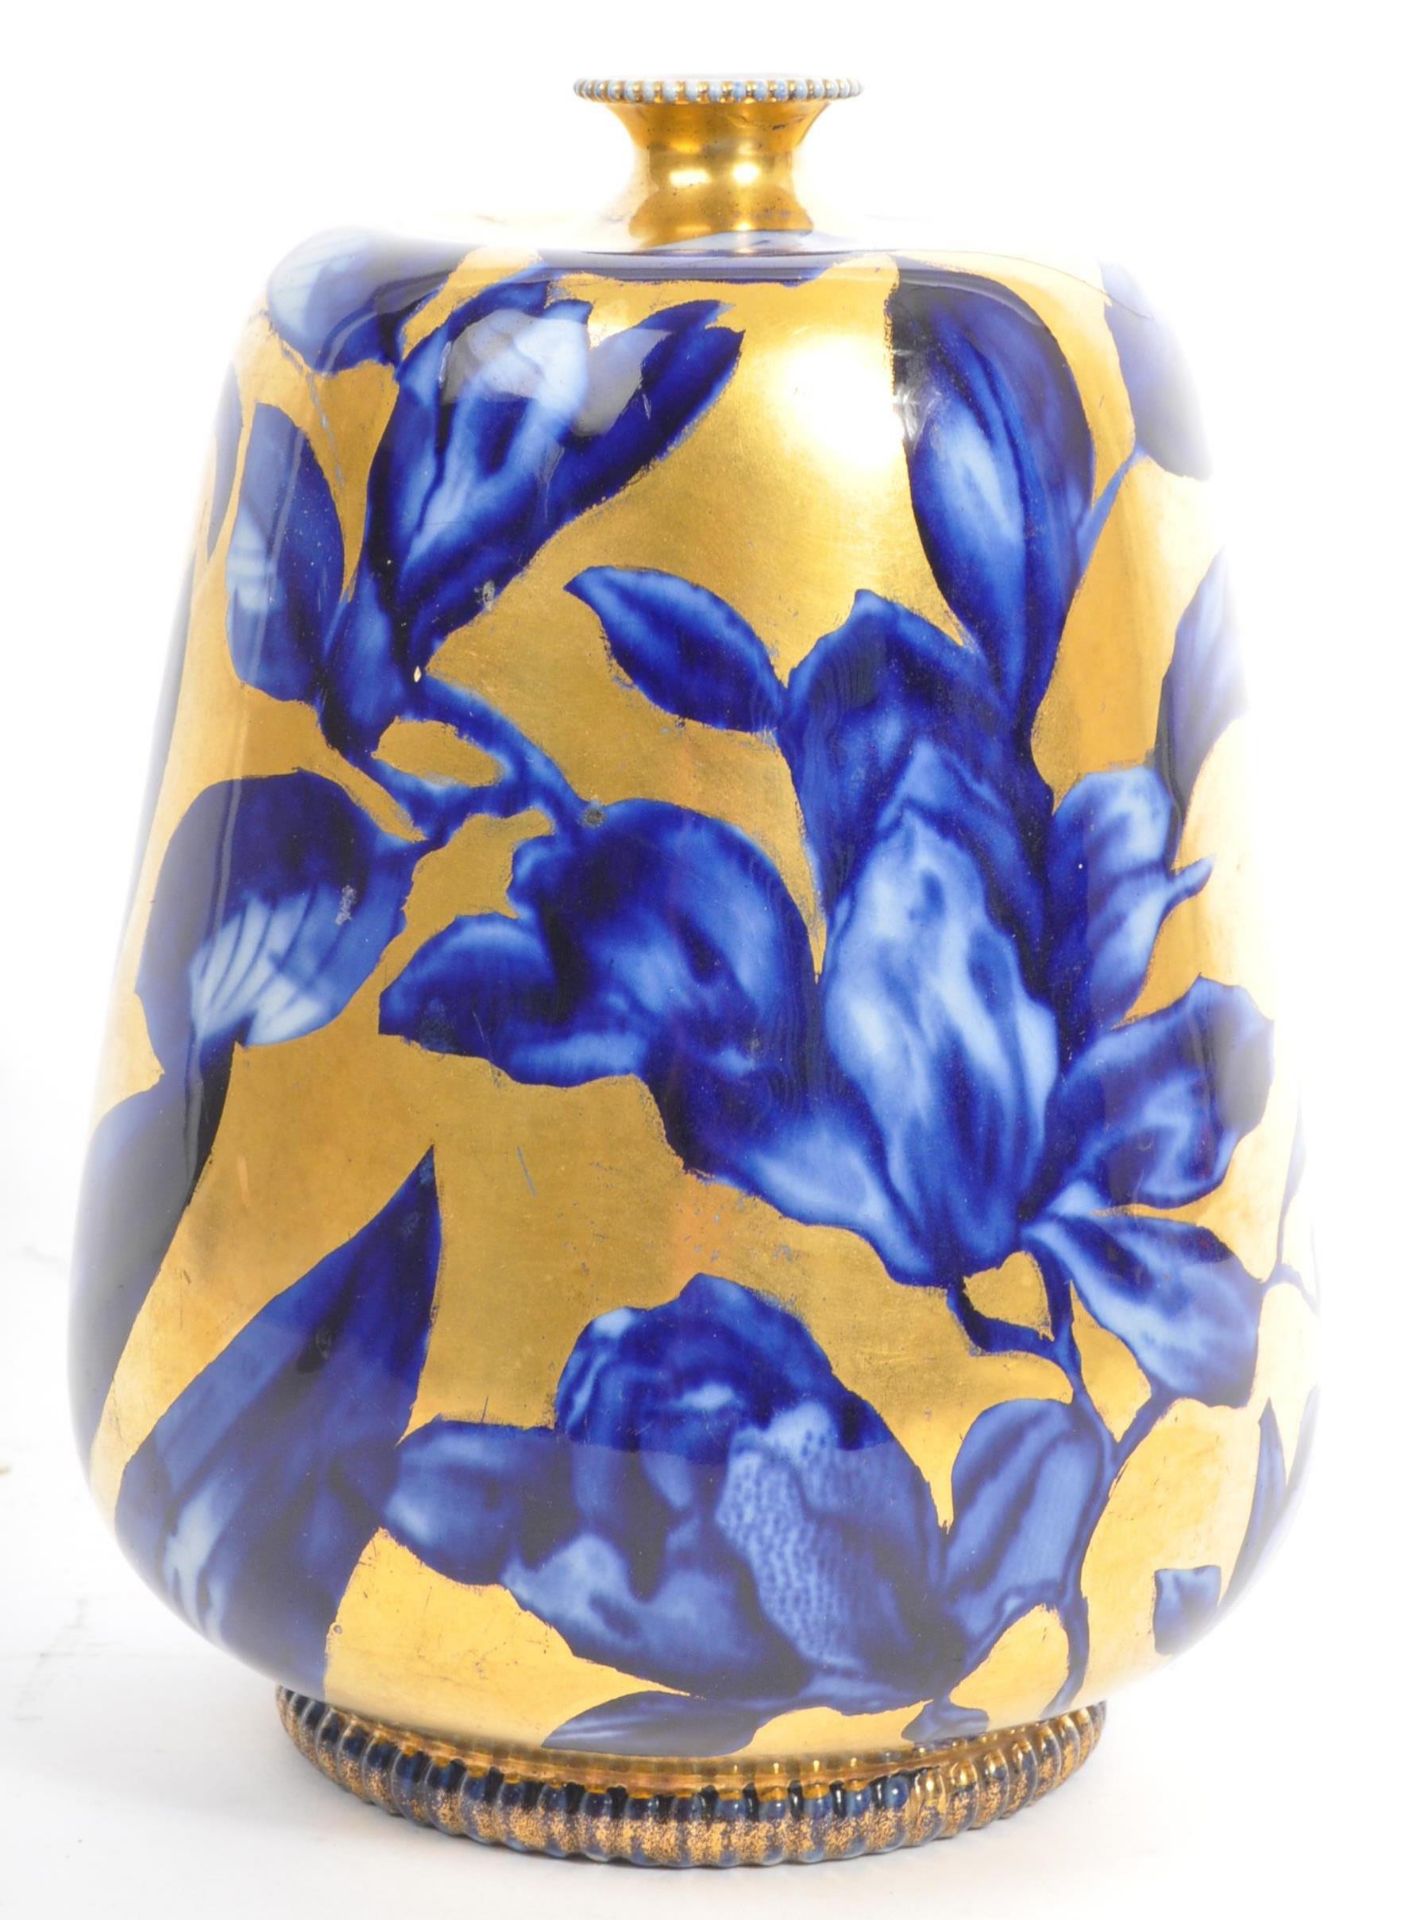 EARLY 20TH CENTURY PHOENIX WARE VASE BY THOMAS FORESTER